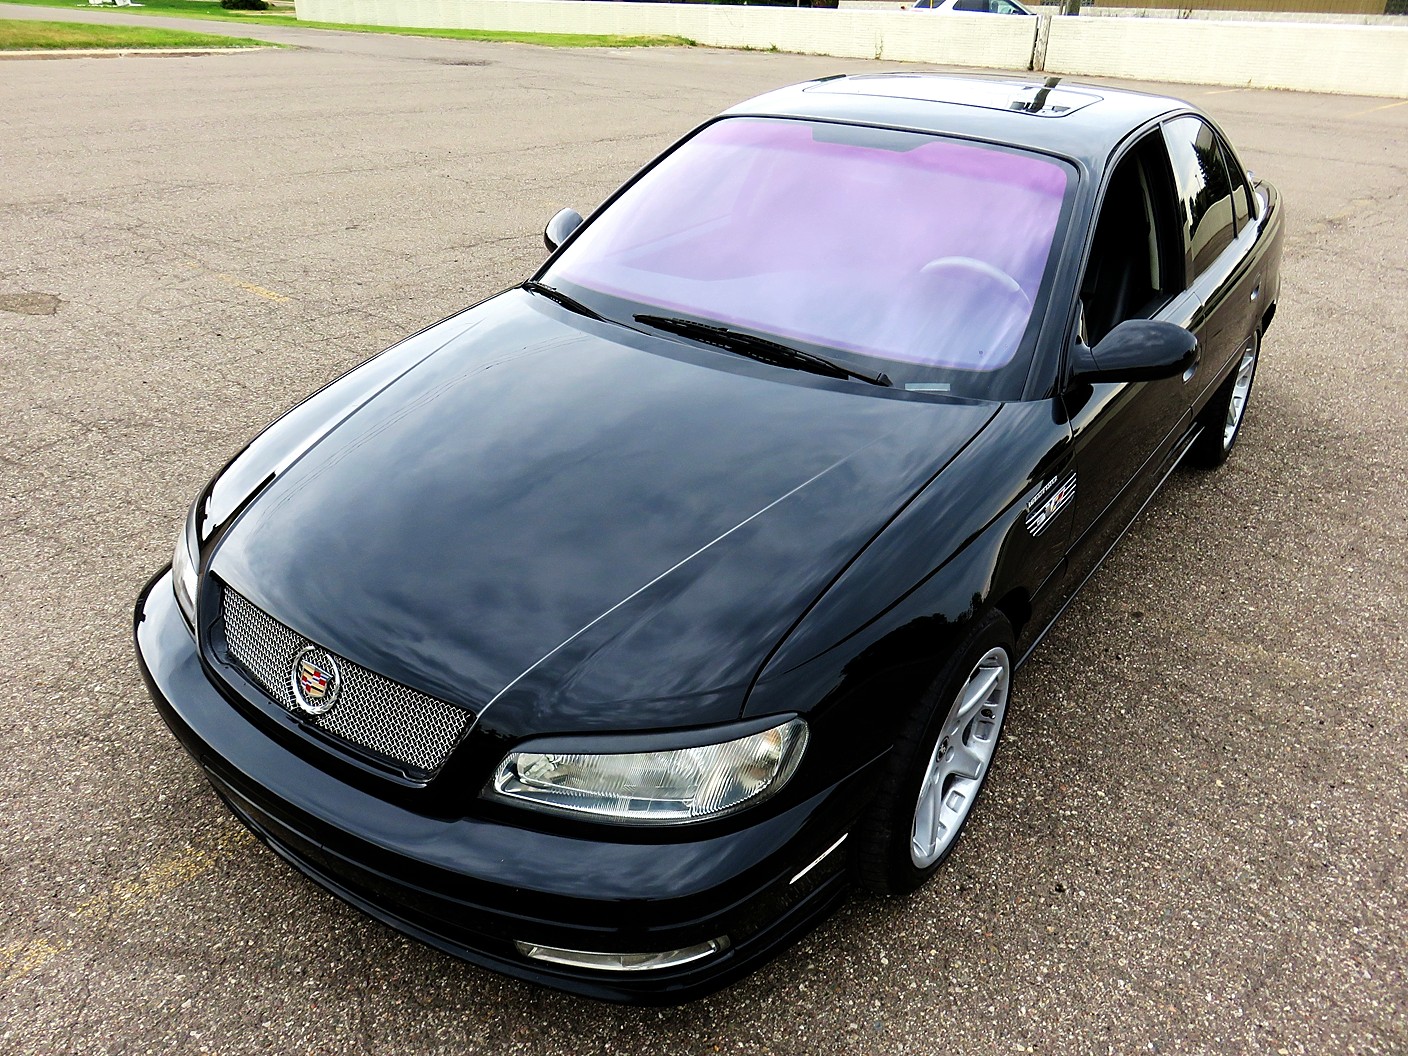 For Sale: 2001 Cadillac Catera with a 7.0L LSx V8 - engineswapdepot.com